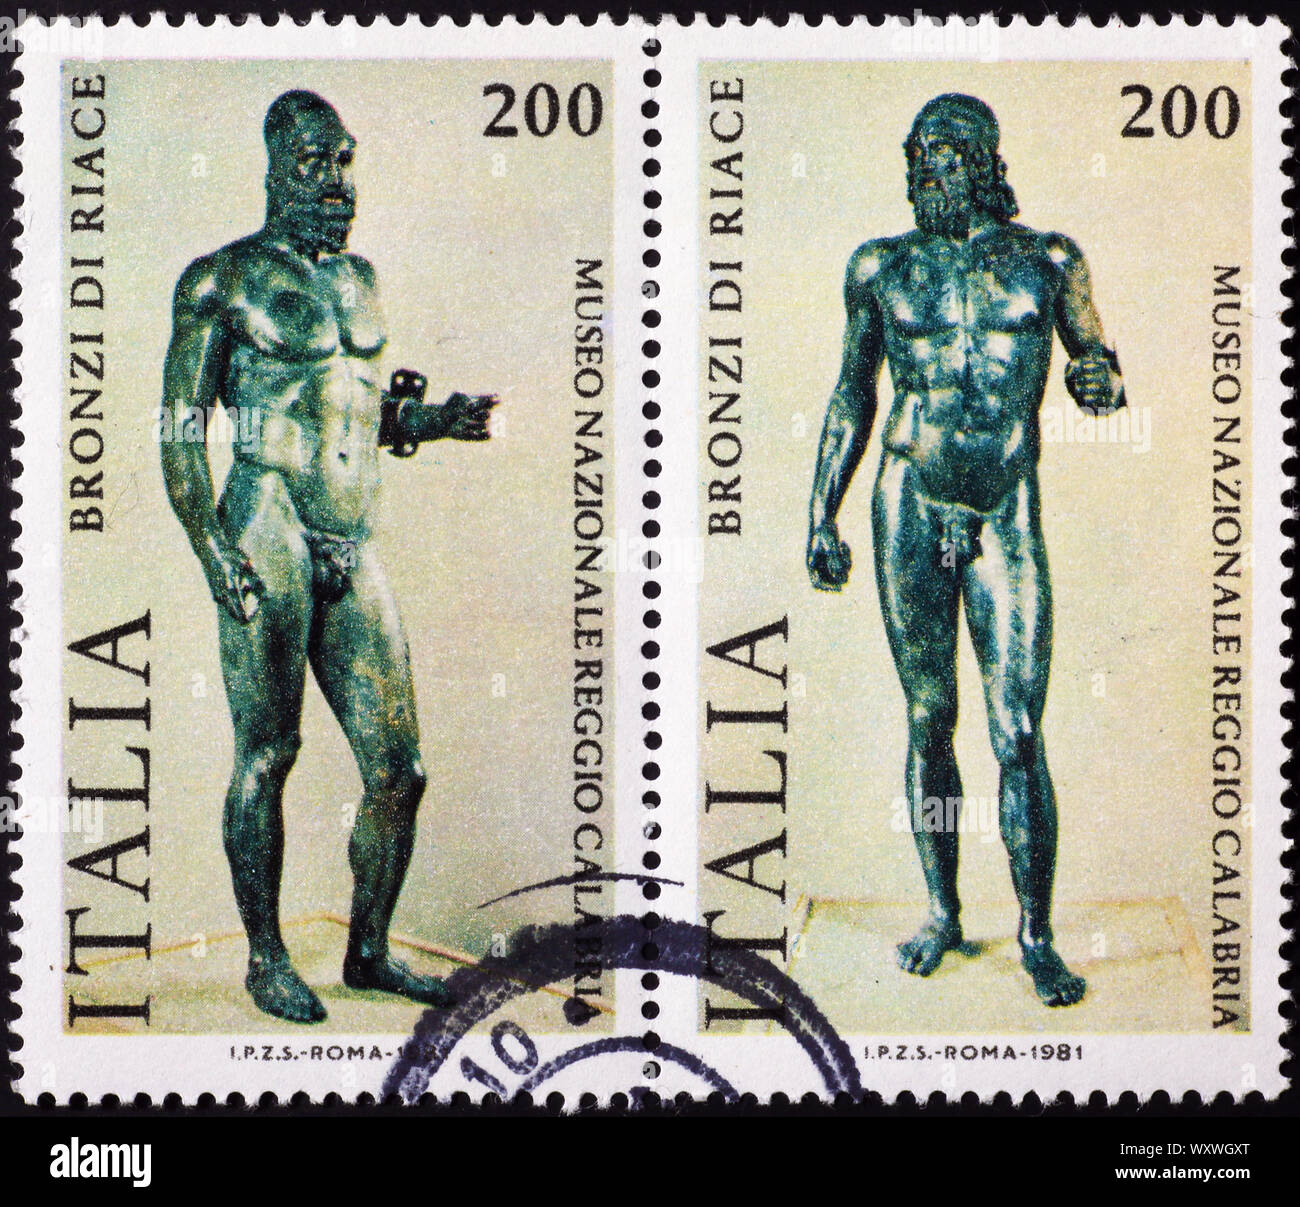 The Riace bronzes on italian postage stamps Stock Photo